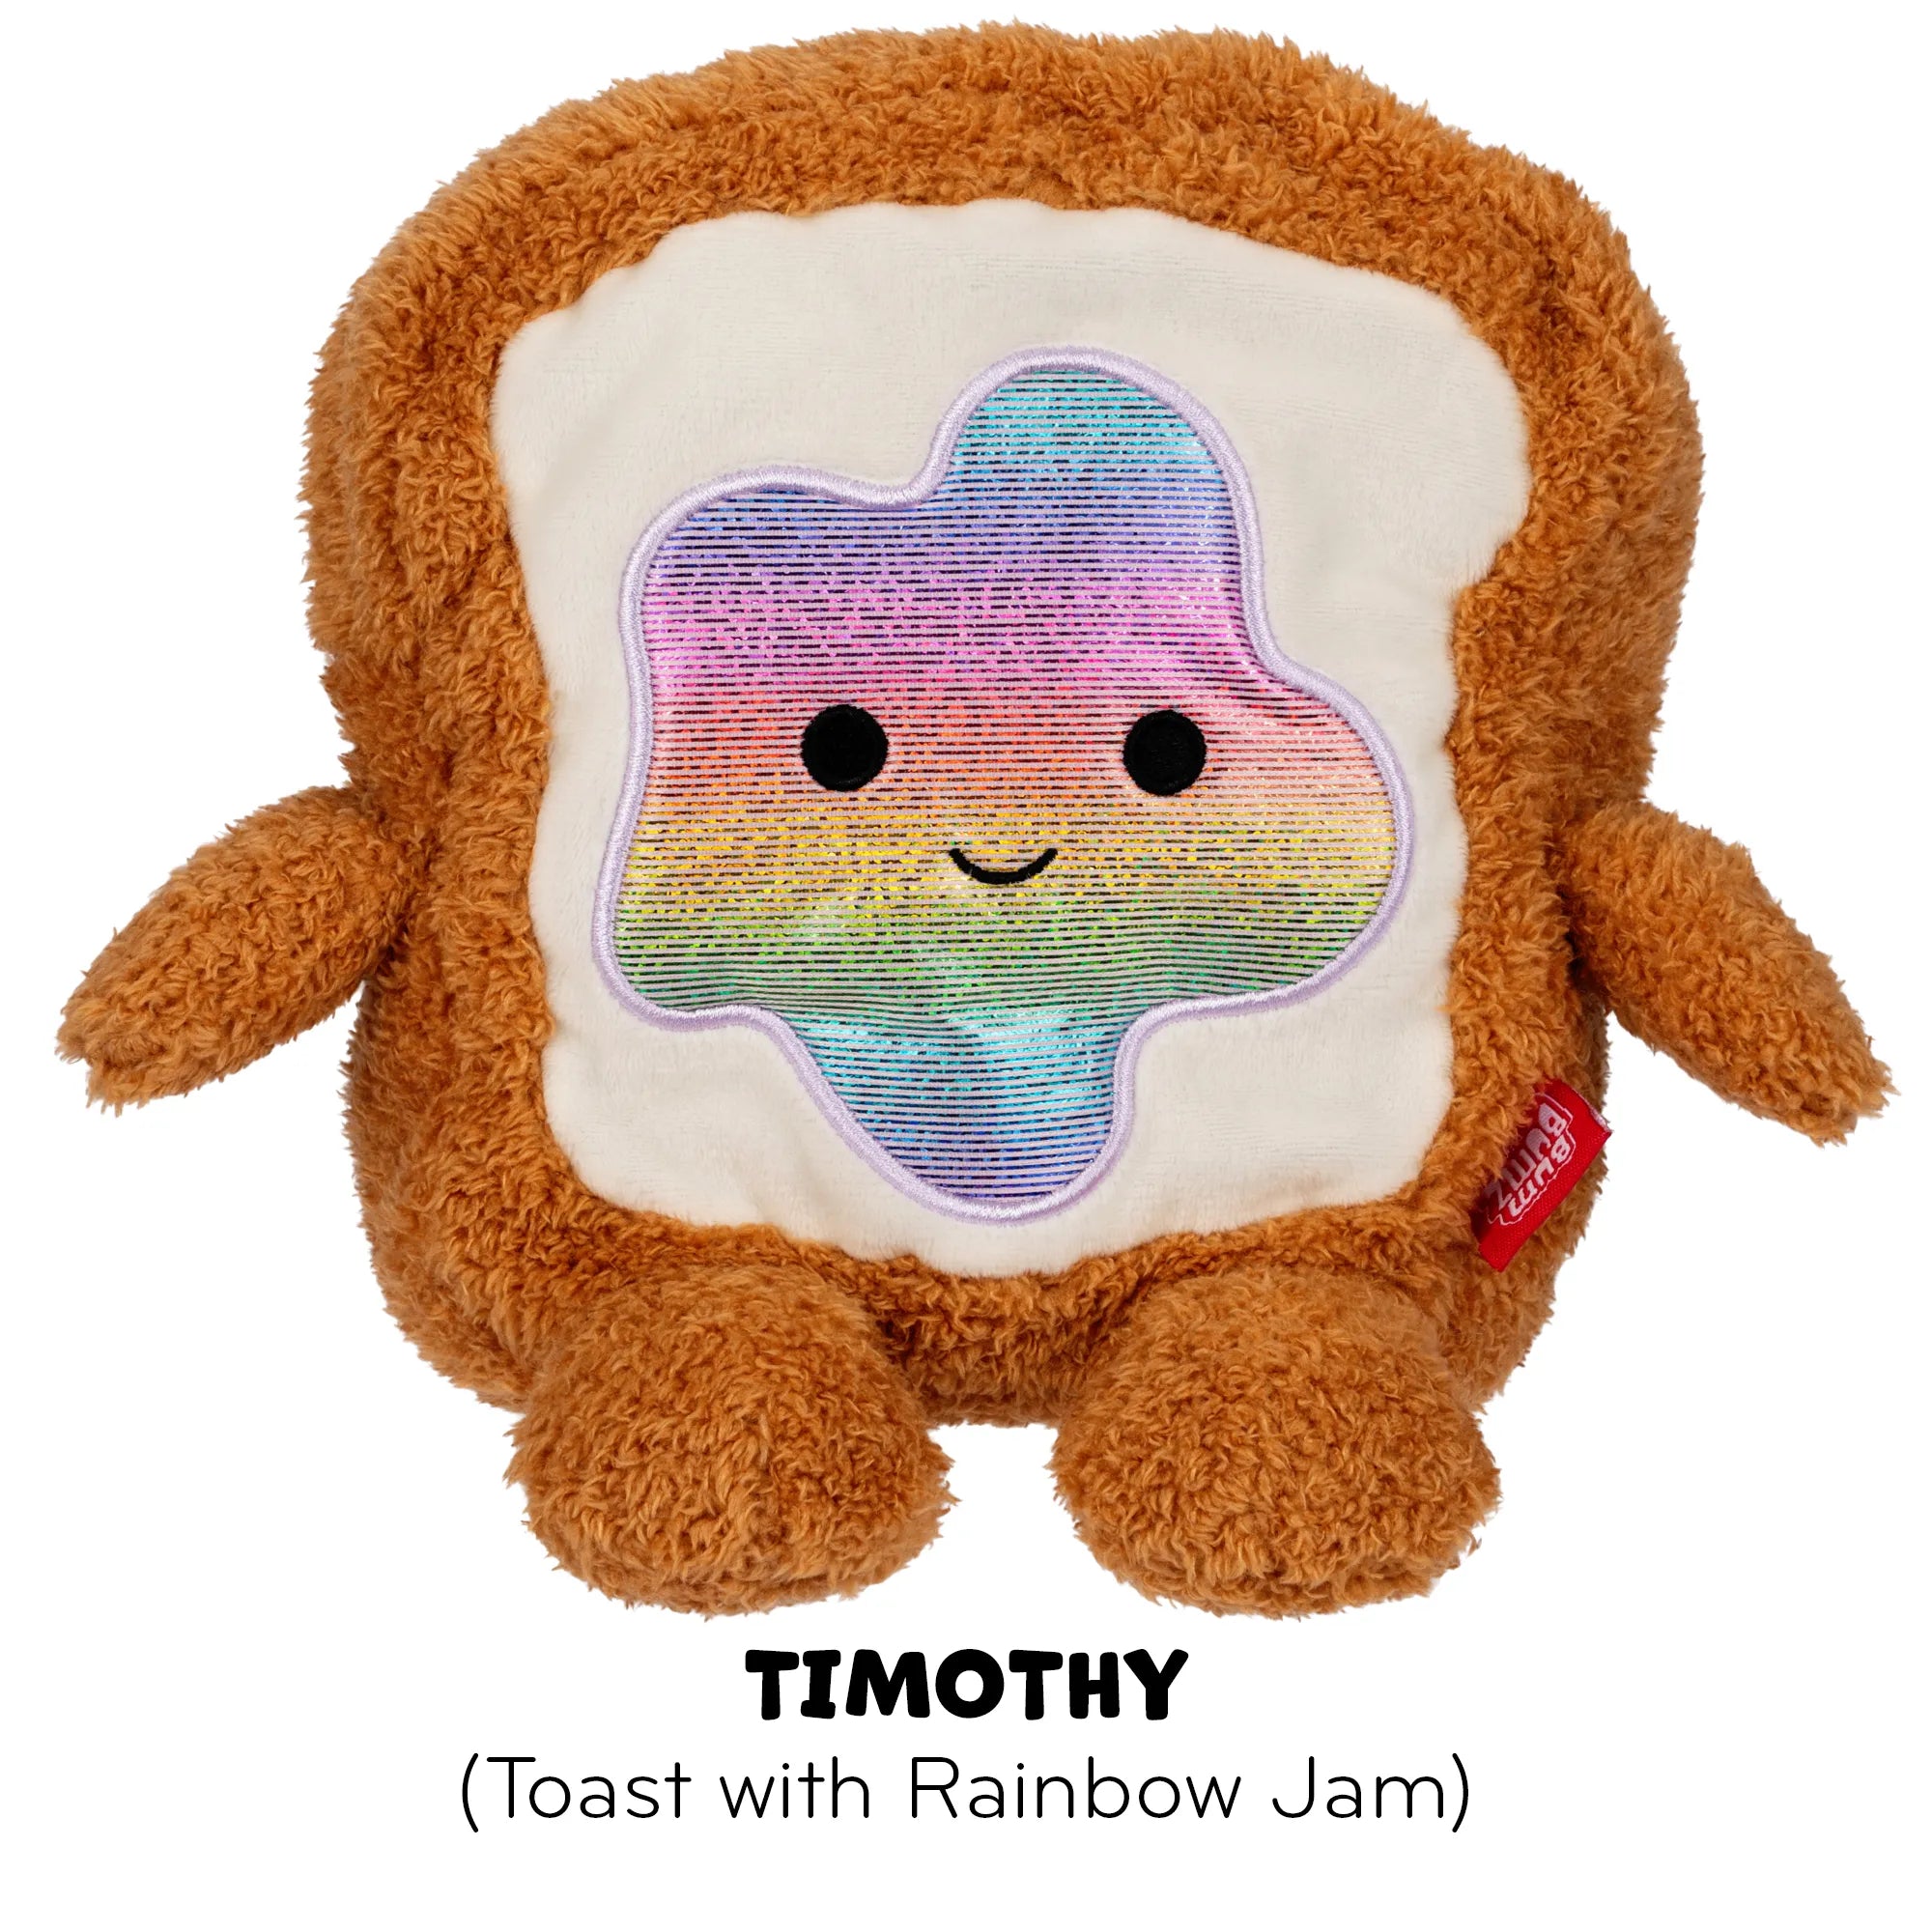 BumBumz Breakfast Series - 7.5” Collectibles - Toast with Rainbow Jam 'Timothy' - Ages 3-Adult - Brown's Hobby & Game